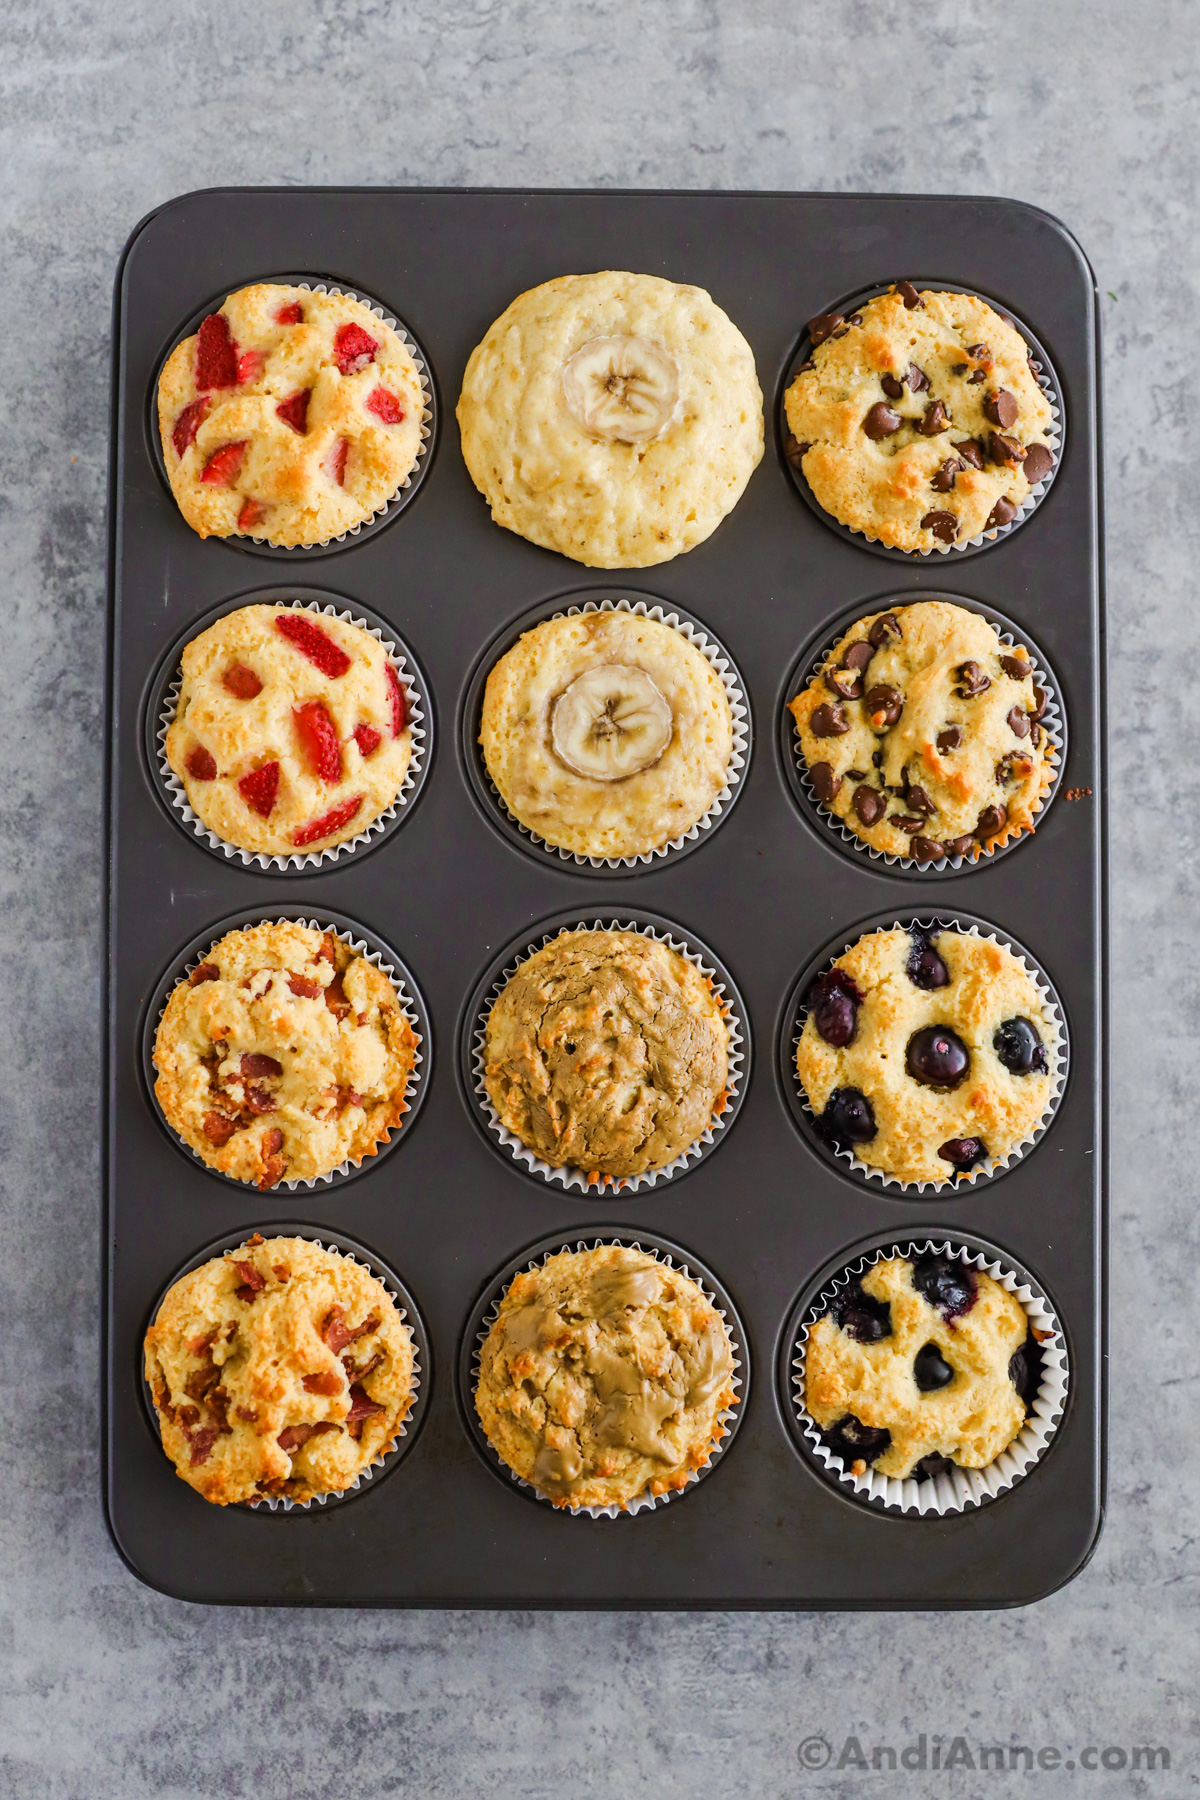 Baked pancake muffins with six flavors in a muffin pan including strawberry, banana, chocolate chip, bacon, nut butter and blueberry.